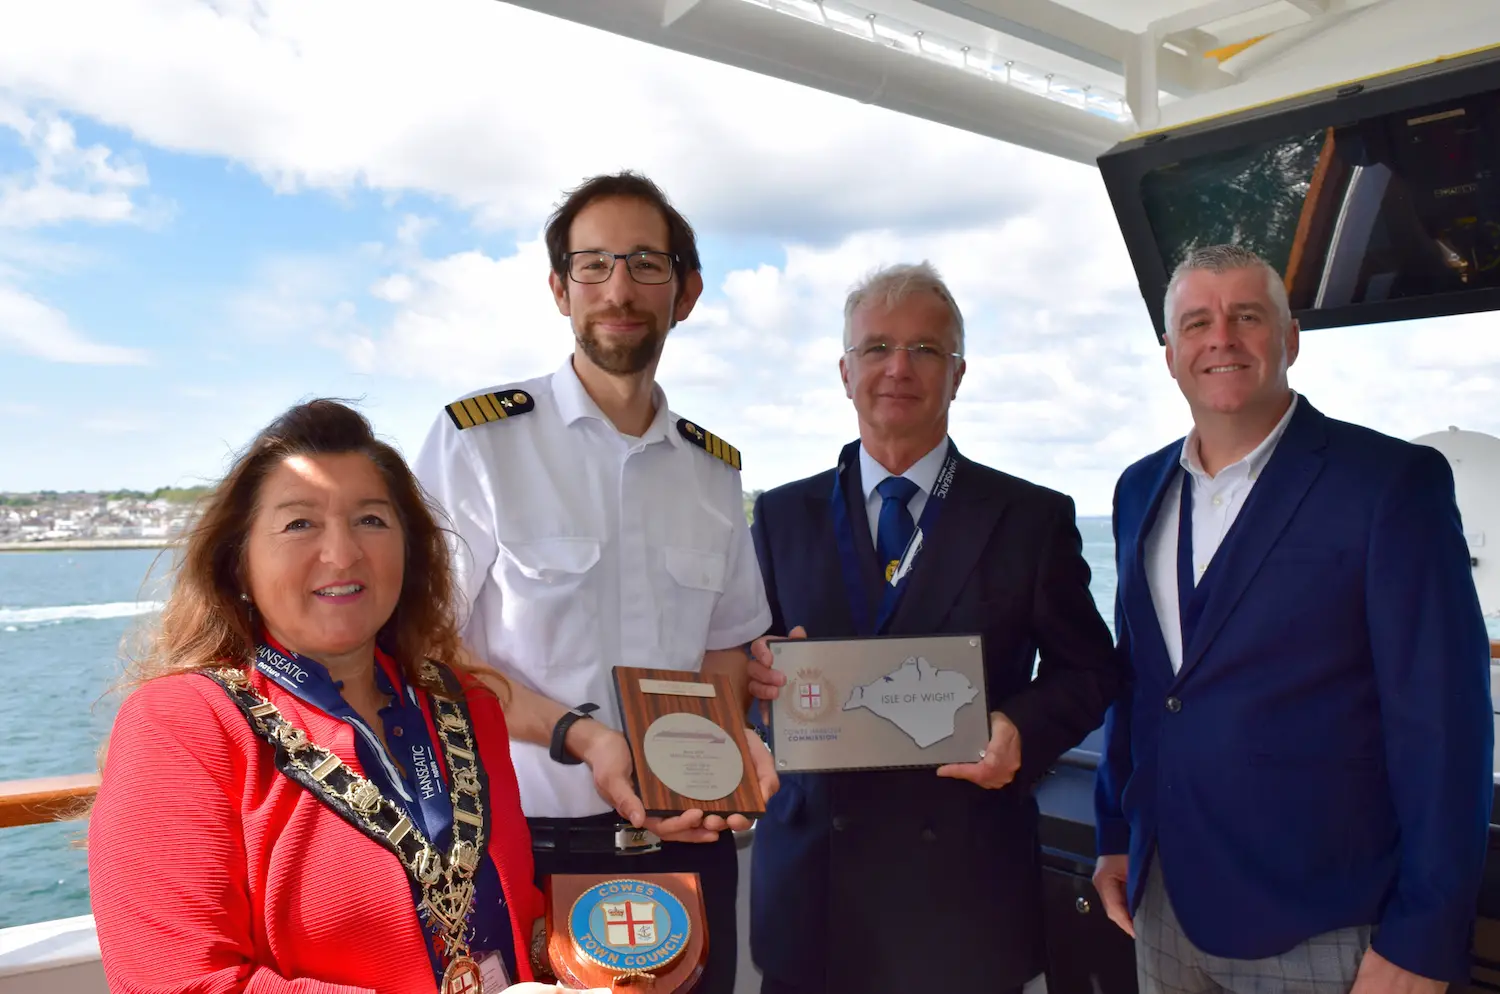 Cowes Mayor Lora Peacey Wilcox, Staff Captain Christoph Kunz of HANSEATIC Nature, Cowes Harbour Master Capt. Stuart McIntosh, Visit Isle of Wight Chairman Ian Griffiths.